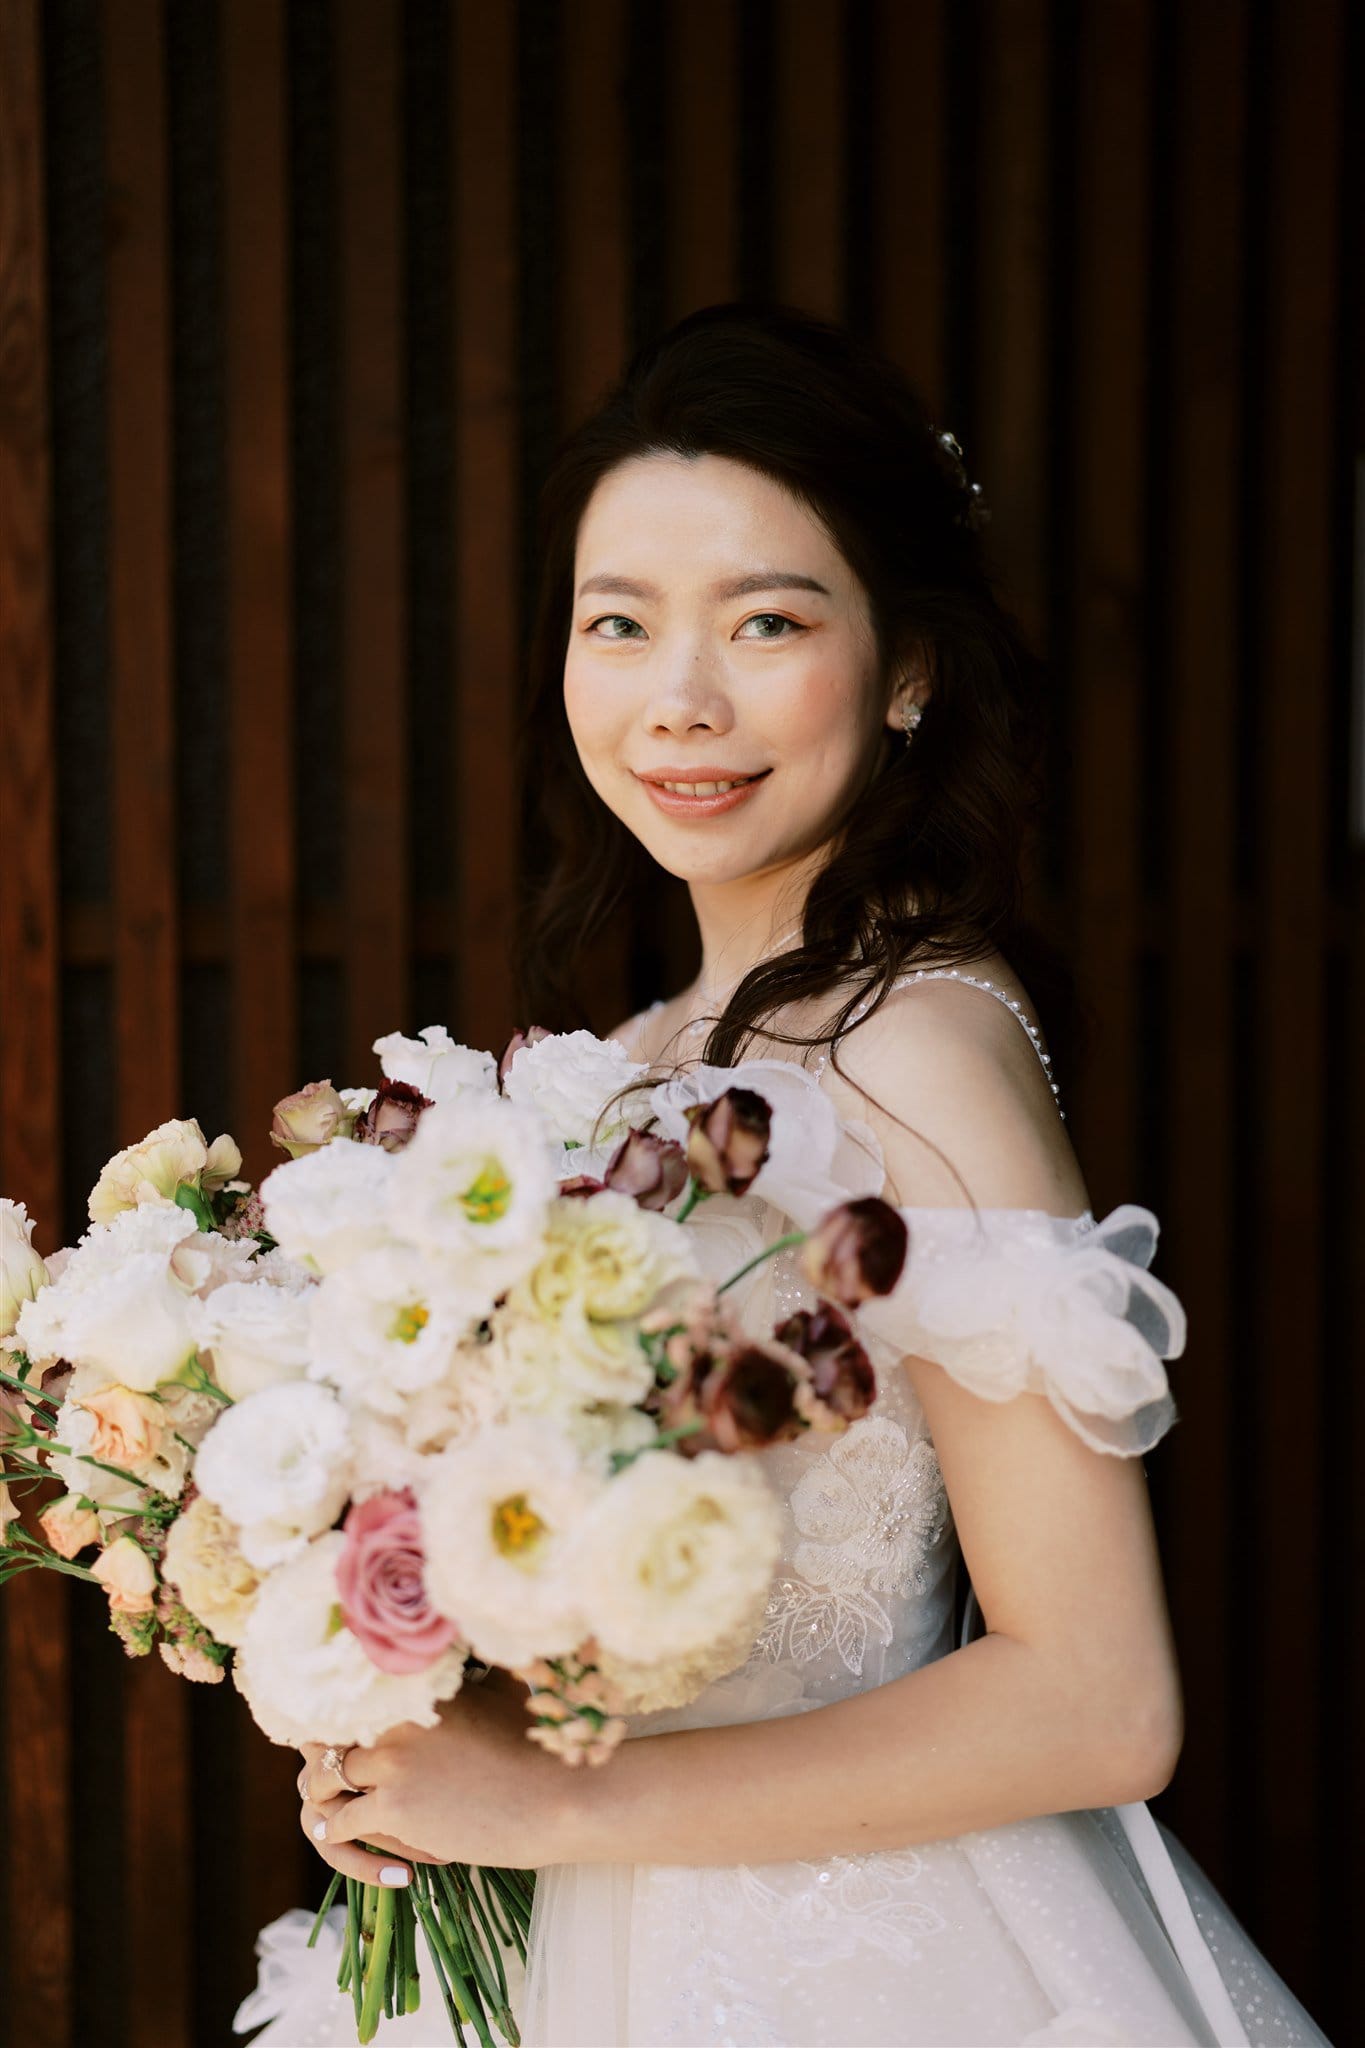 Kyoto Tokyo Japan Elopement Wedding Photographer, Planner & Videographer | A Japan elopement photographer captures a bride holding a bouquet in front of a wooden wall.